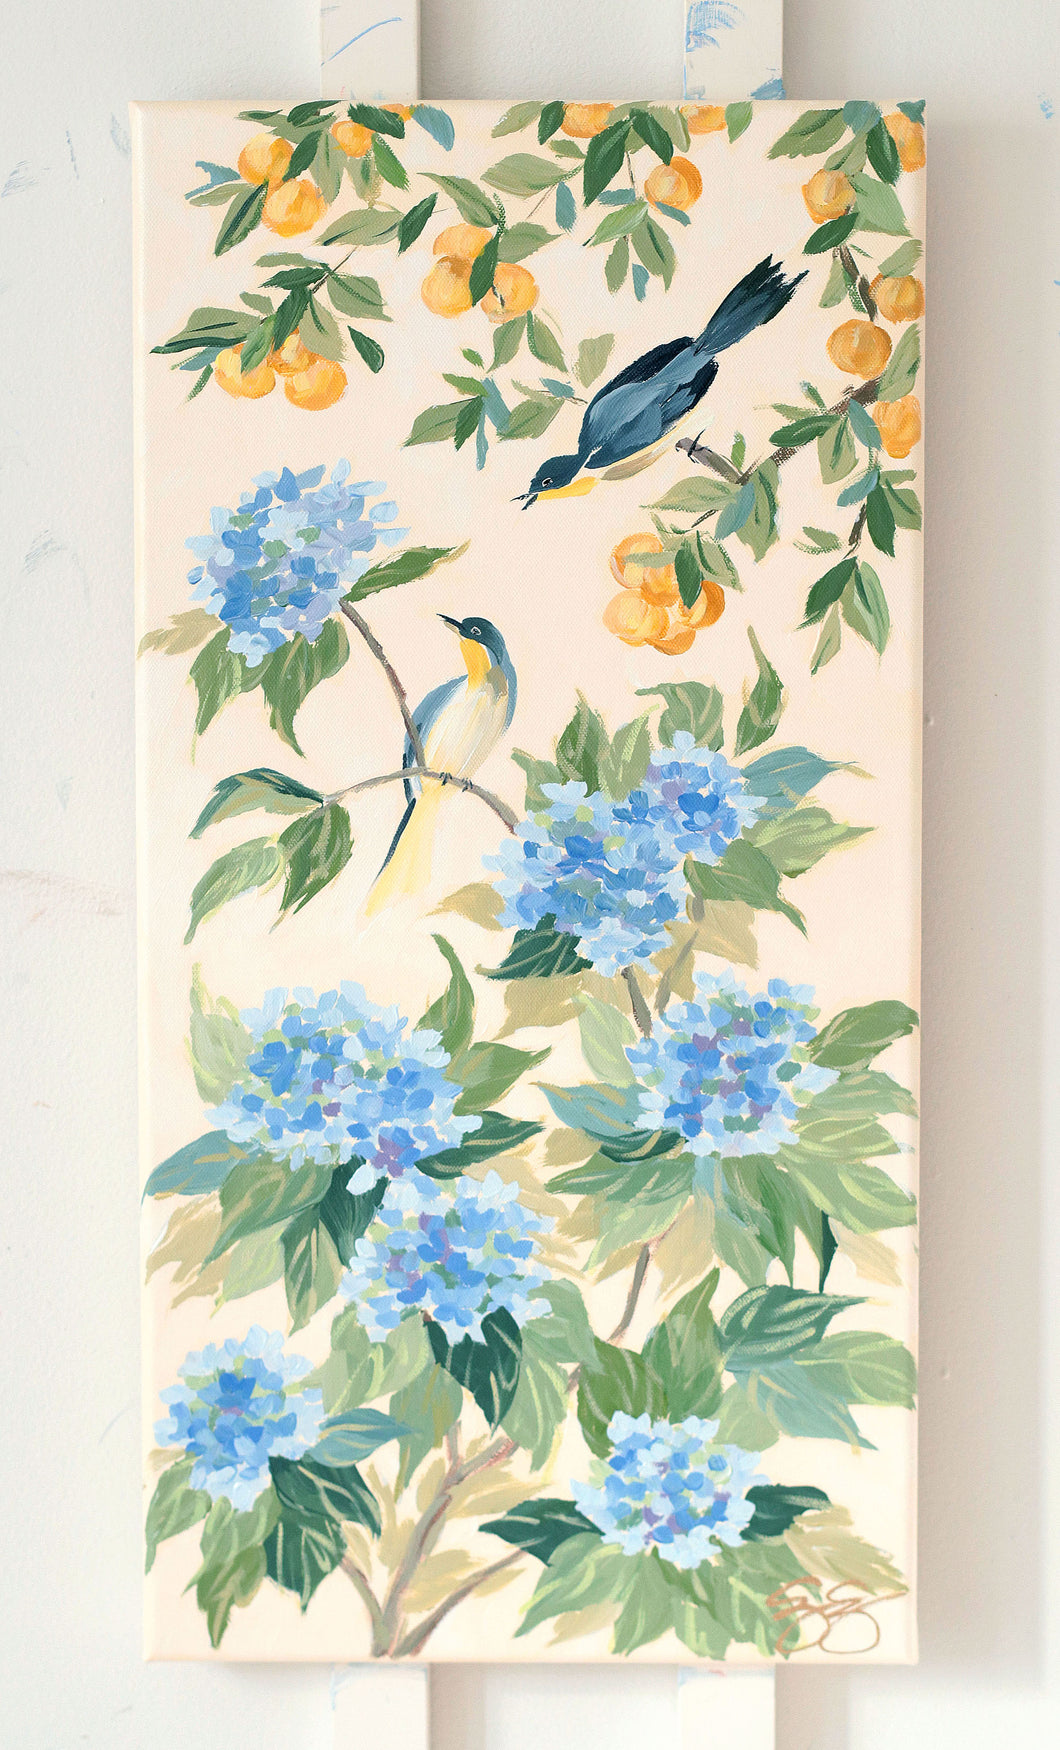 Chinoiserie painting of fruit and blue hydrangeas, 